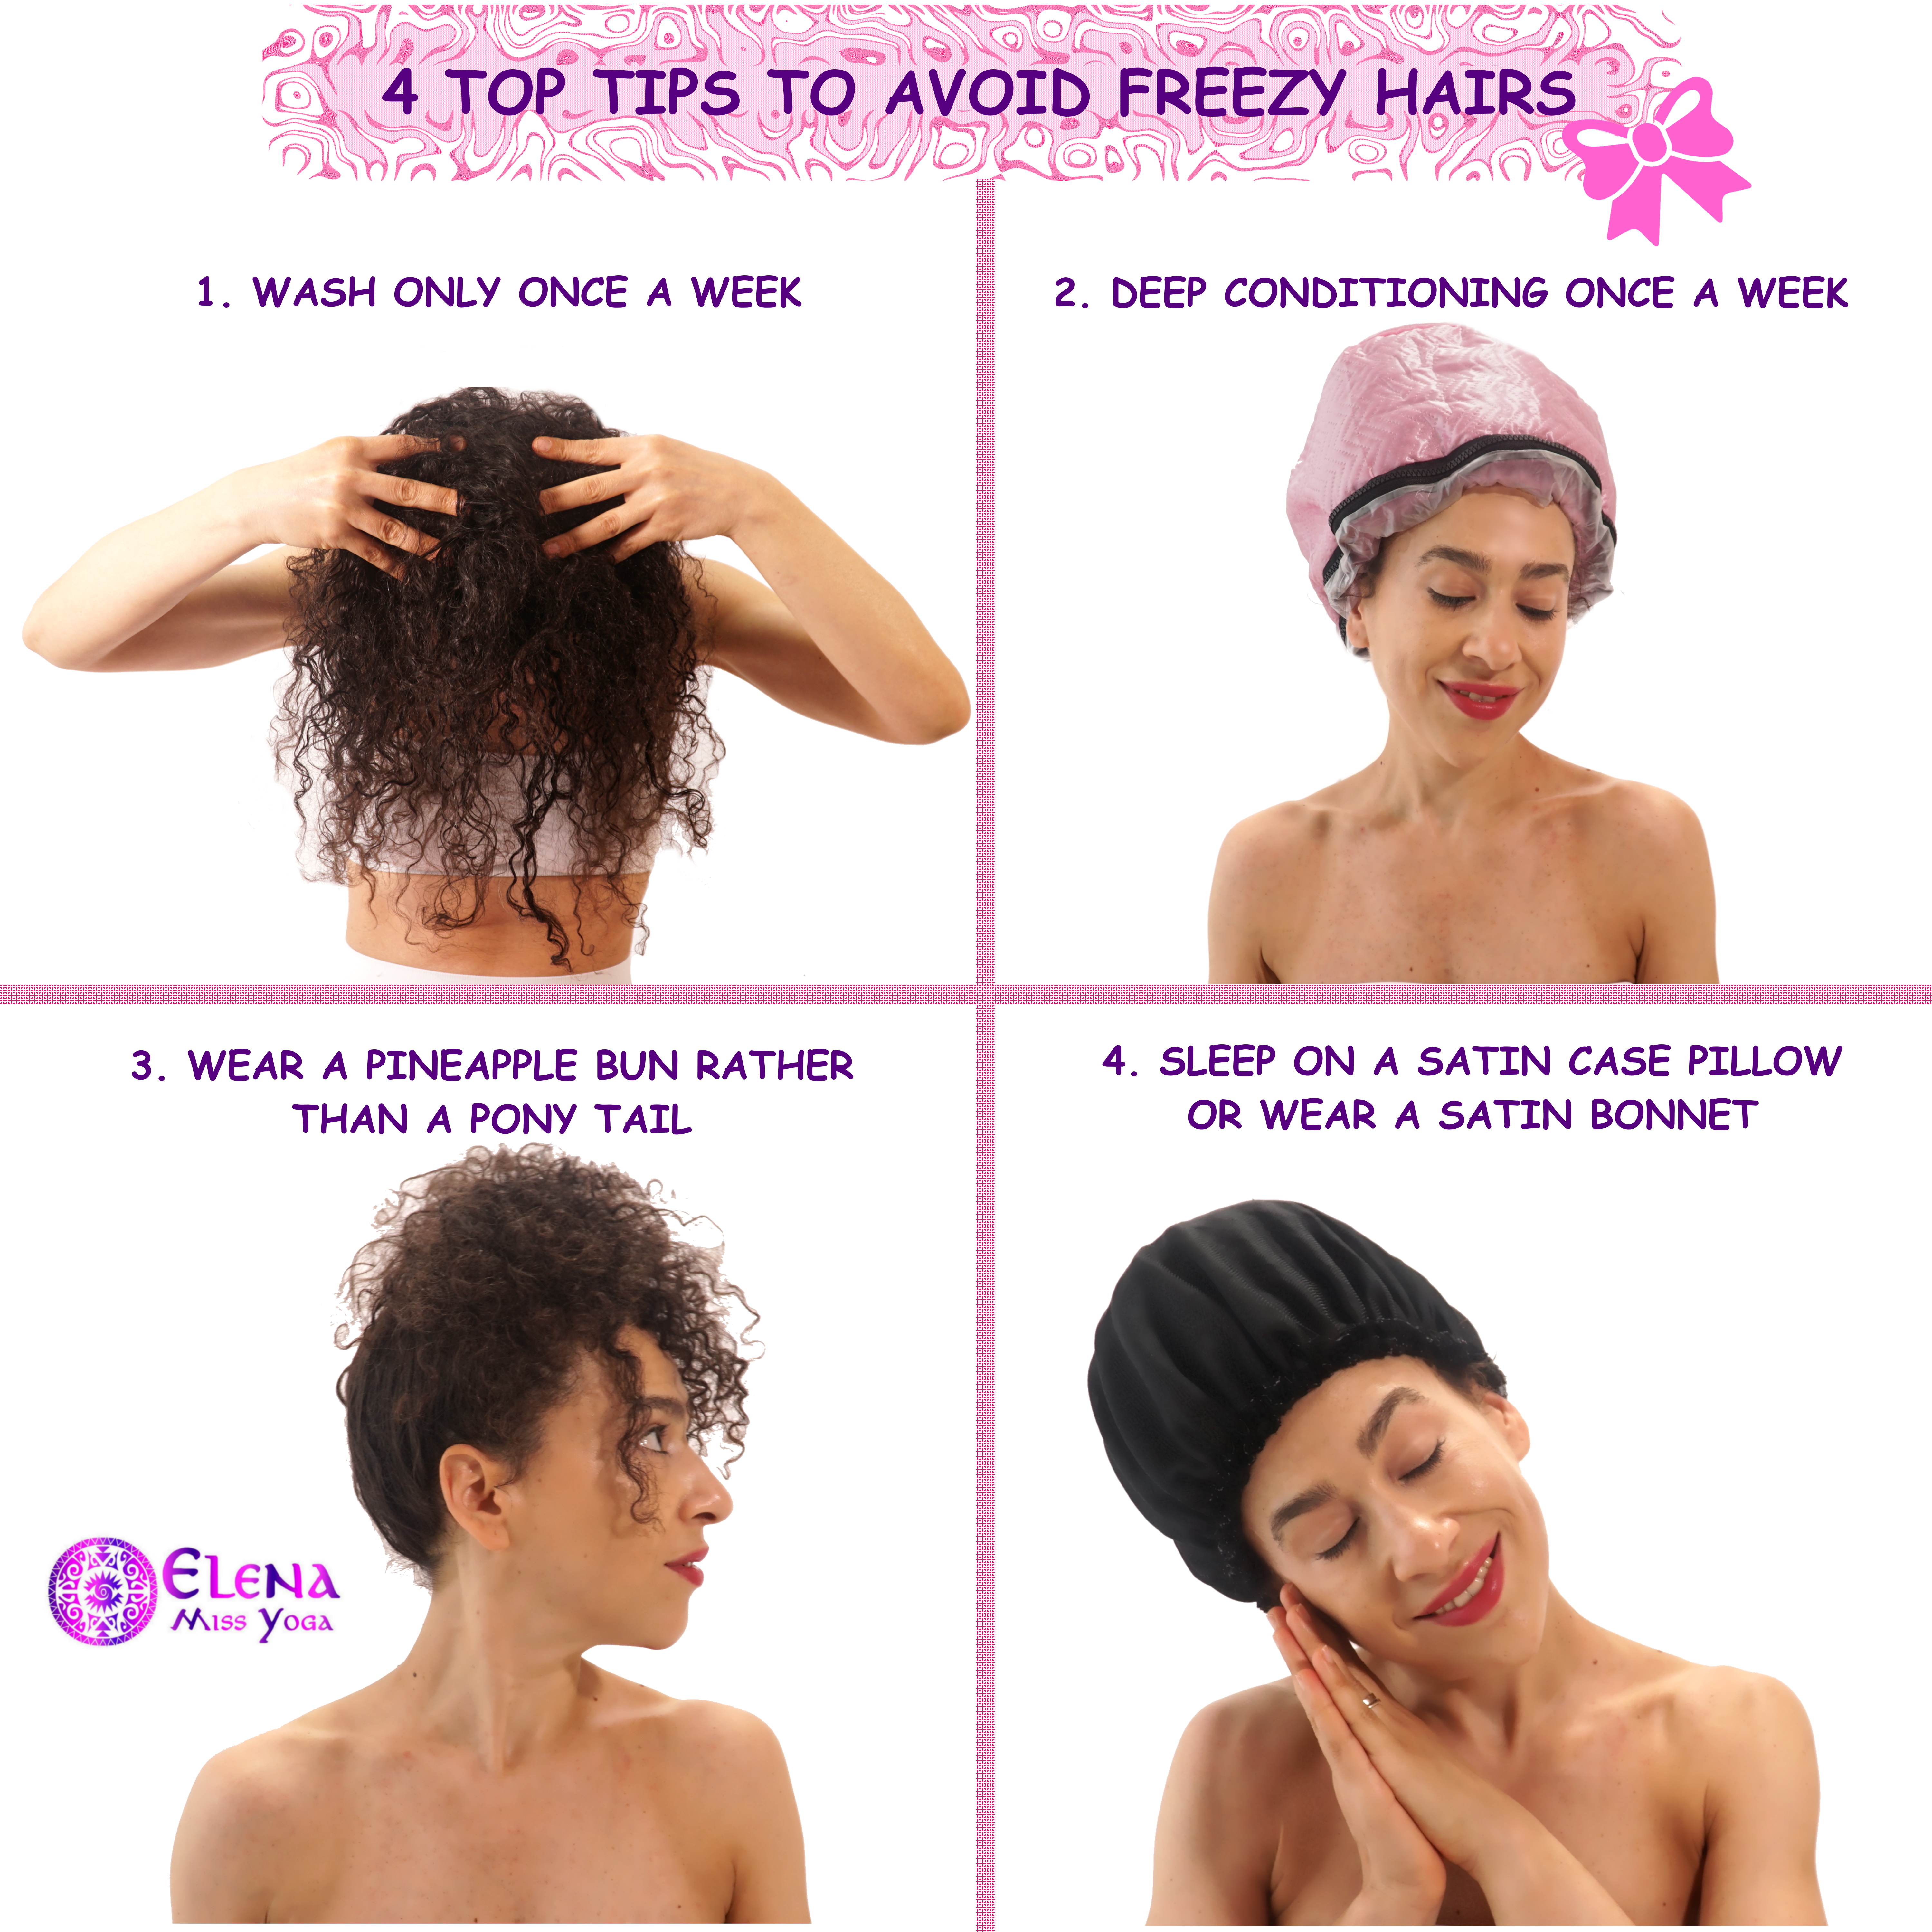 4 TOP TIPS TO AVOID FREEZY HAIRS